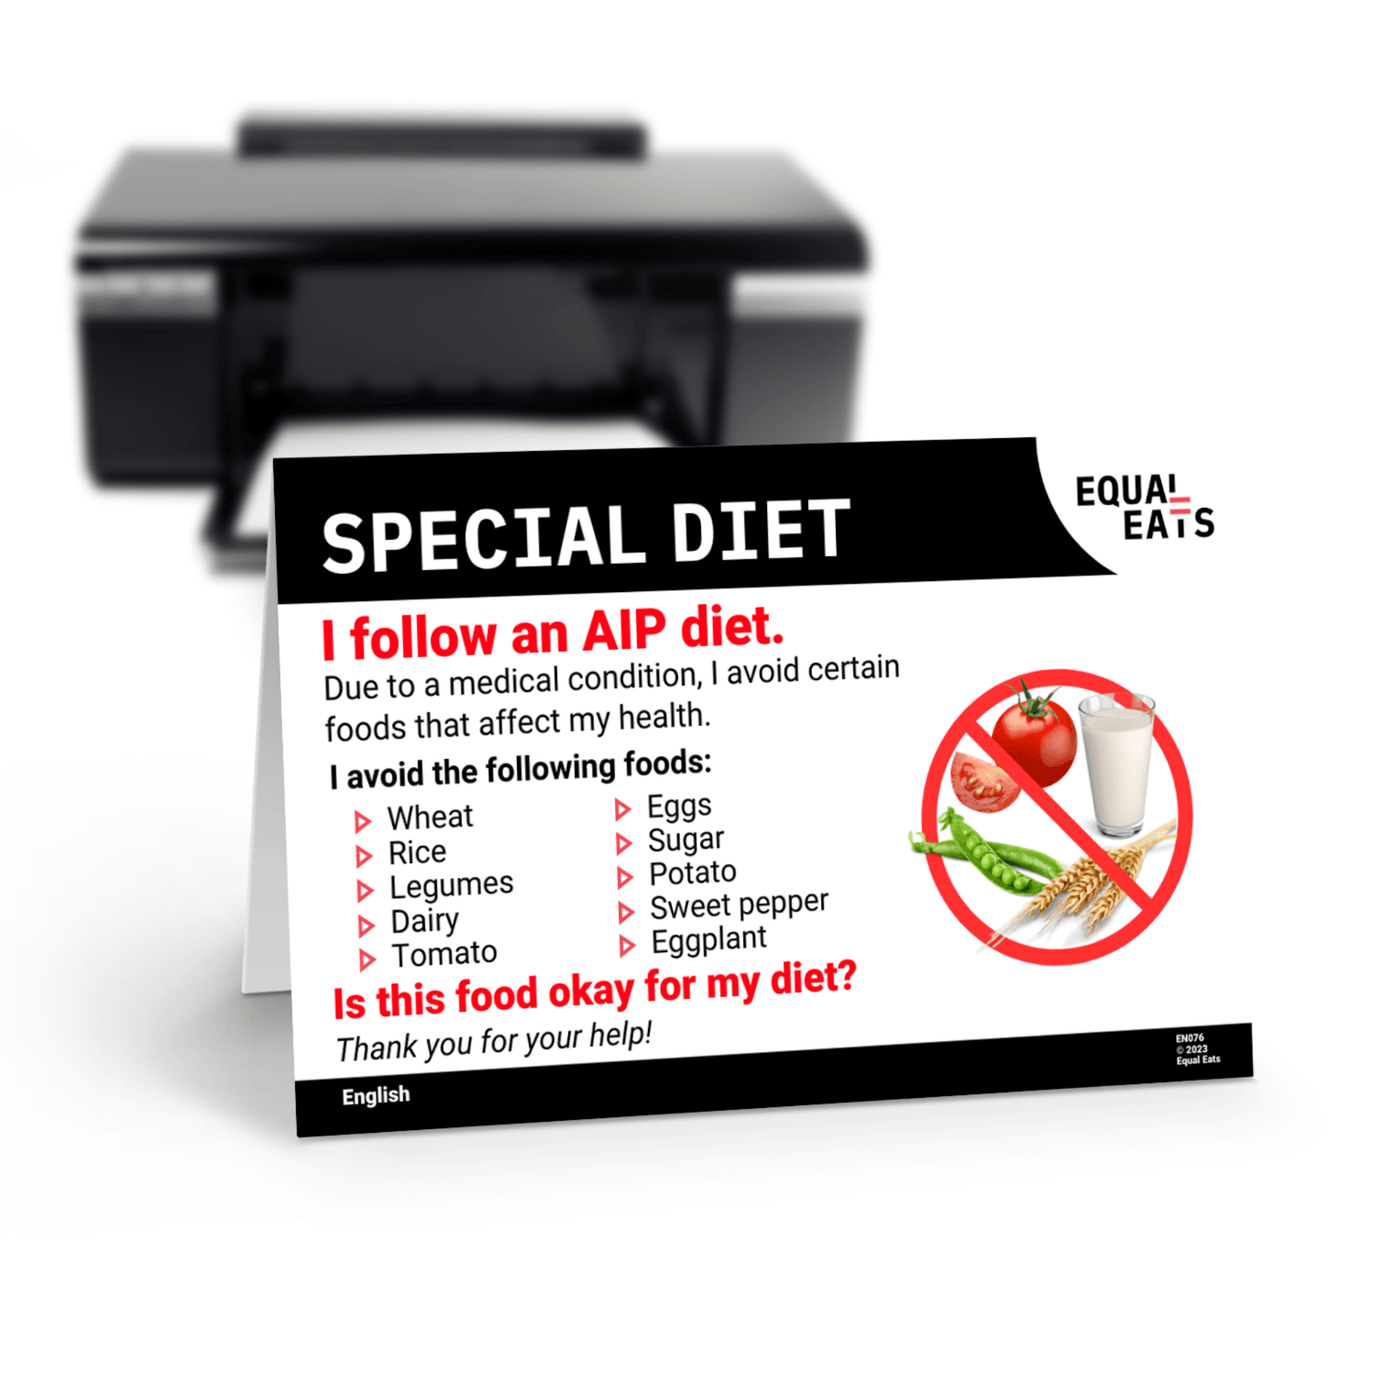 AIP Diet Card by Equal Eats